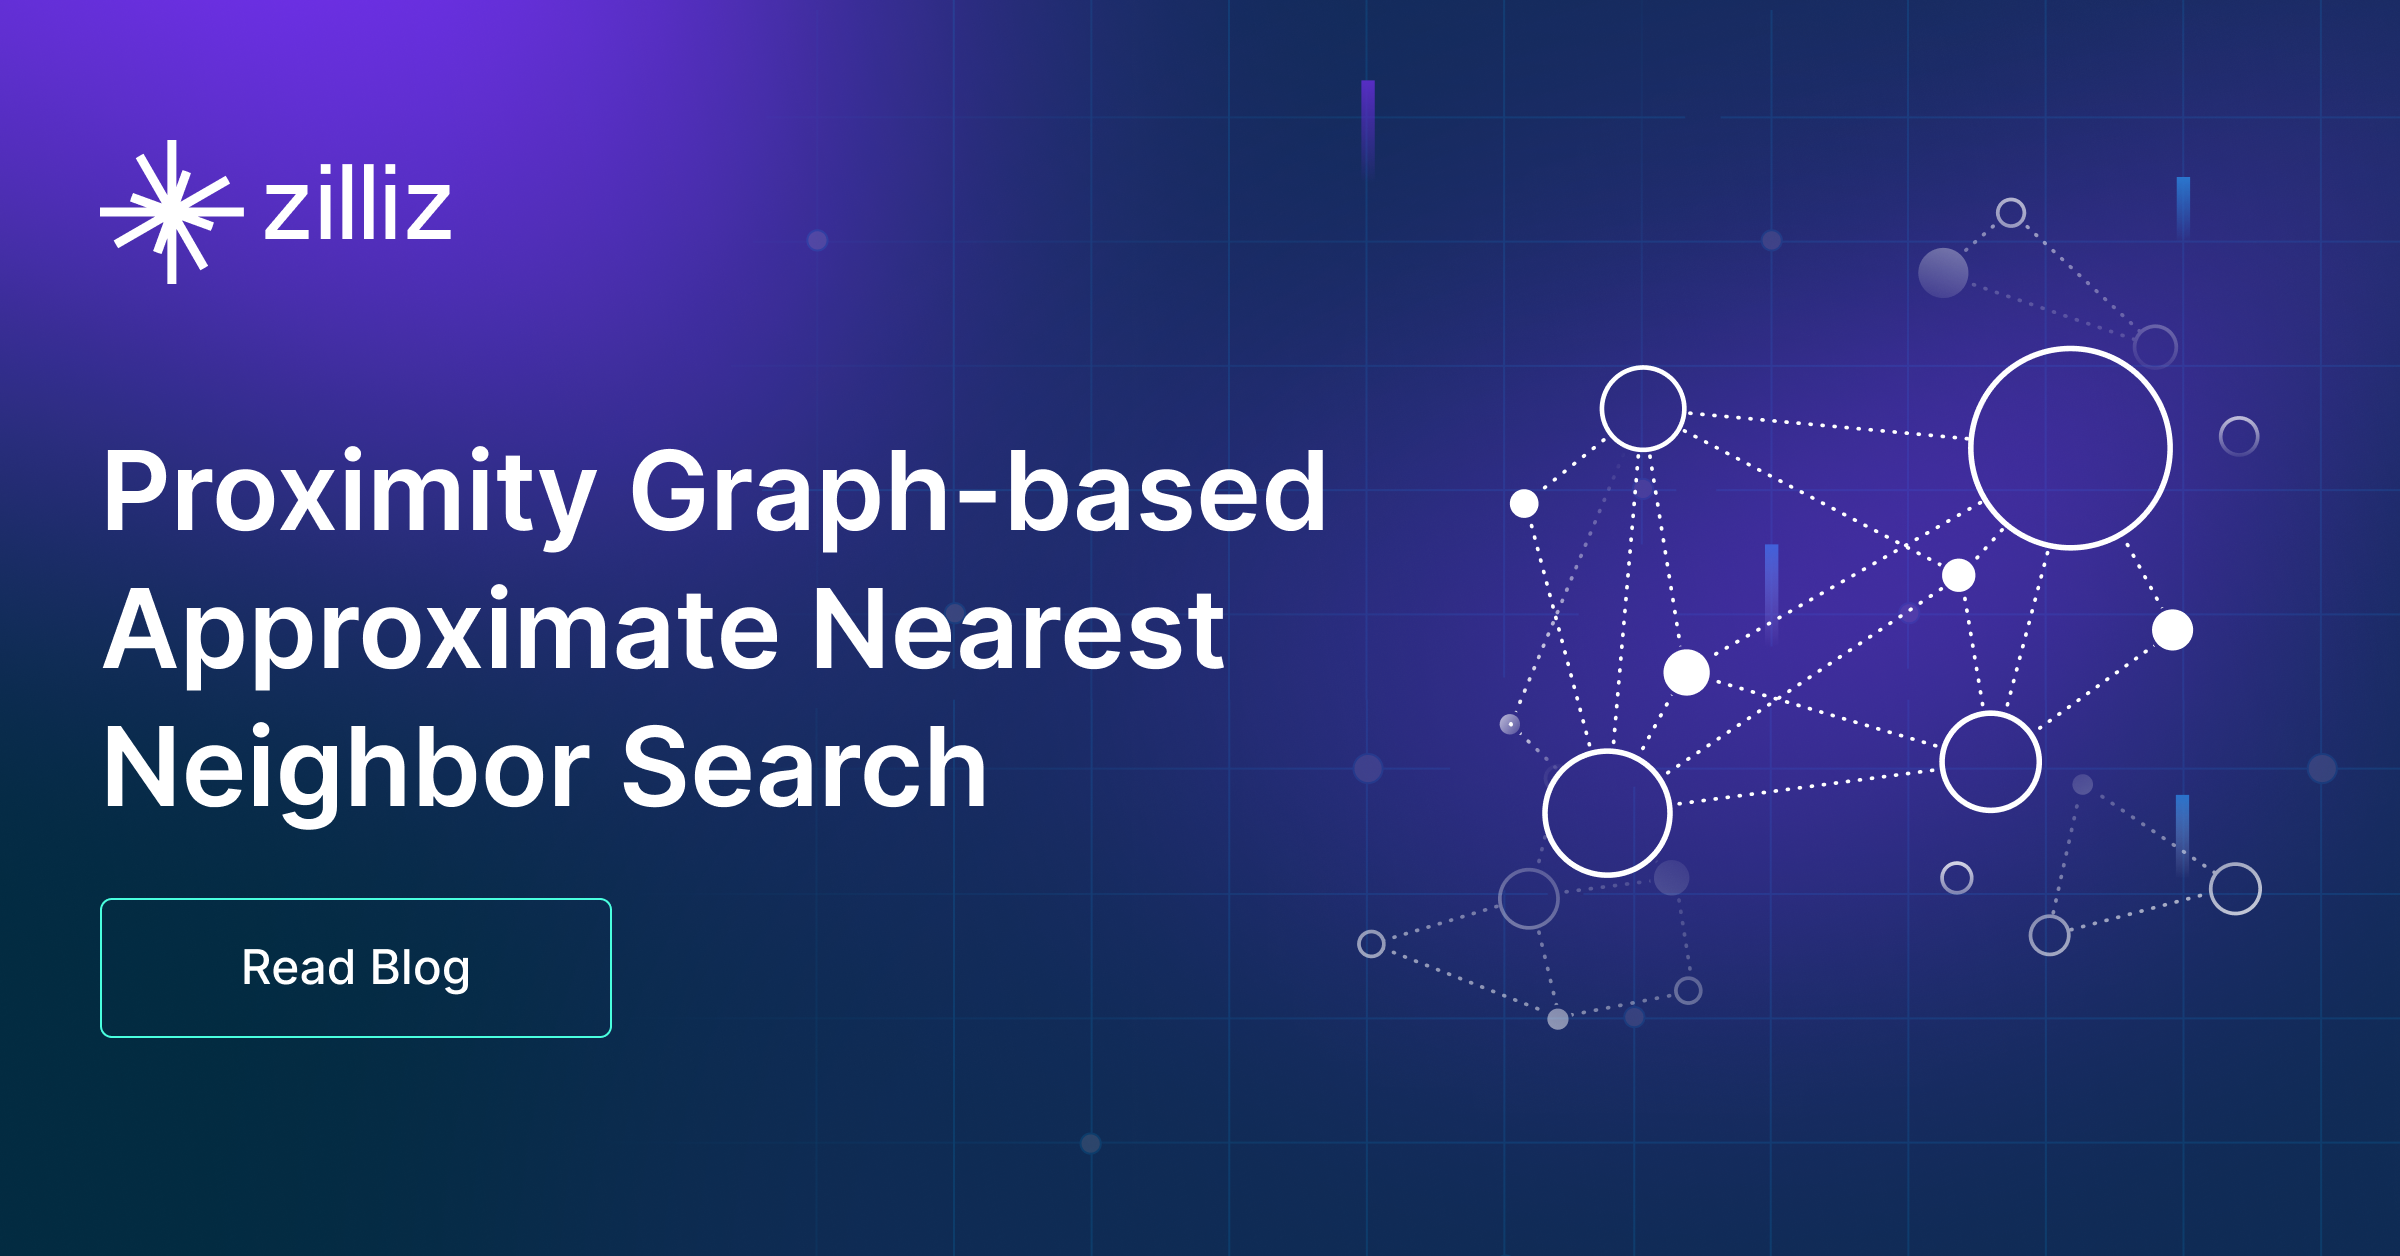 Proximity Graph-based Approximate Nearest Neighbor Search